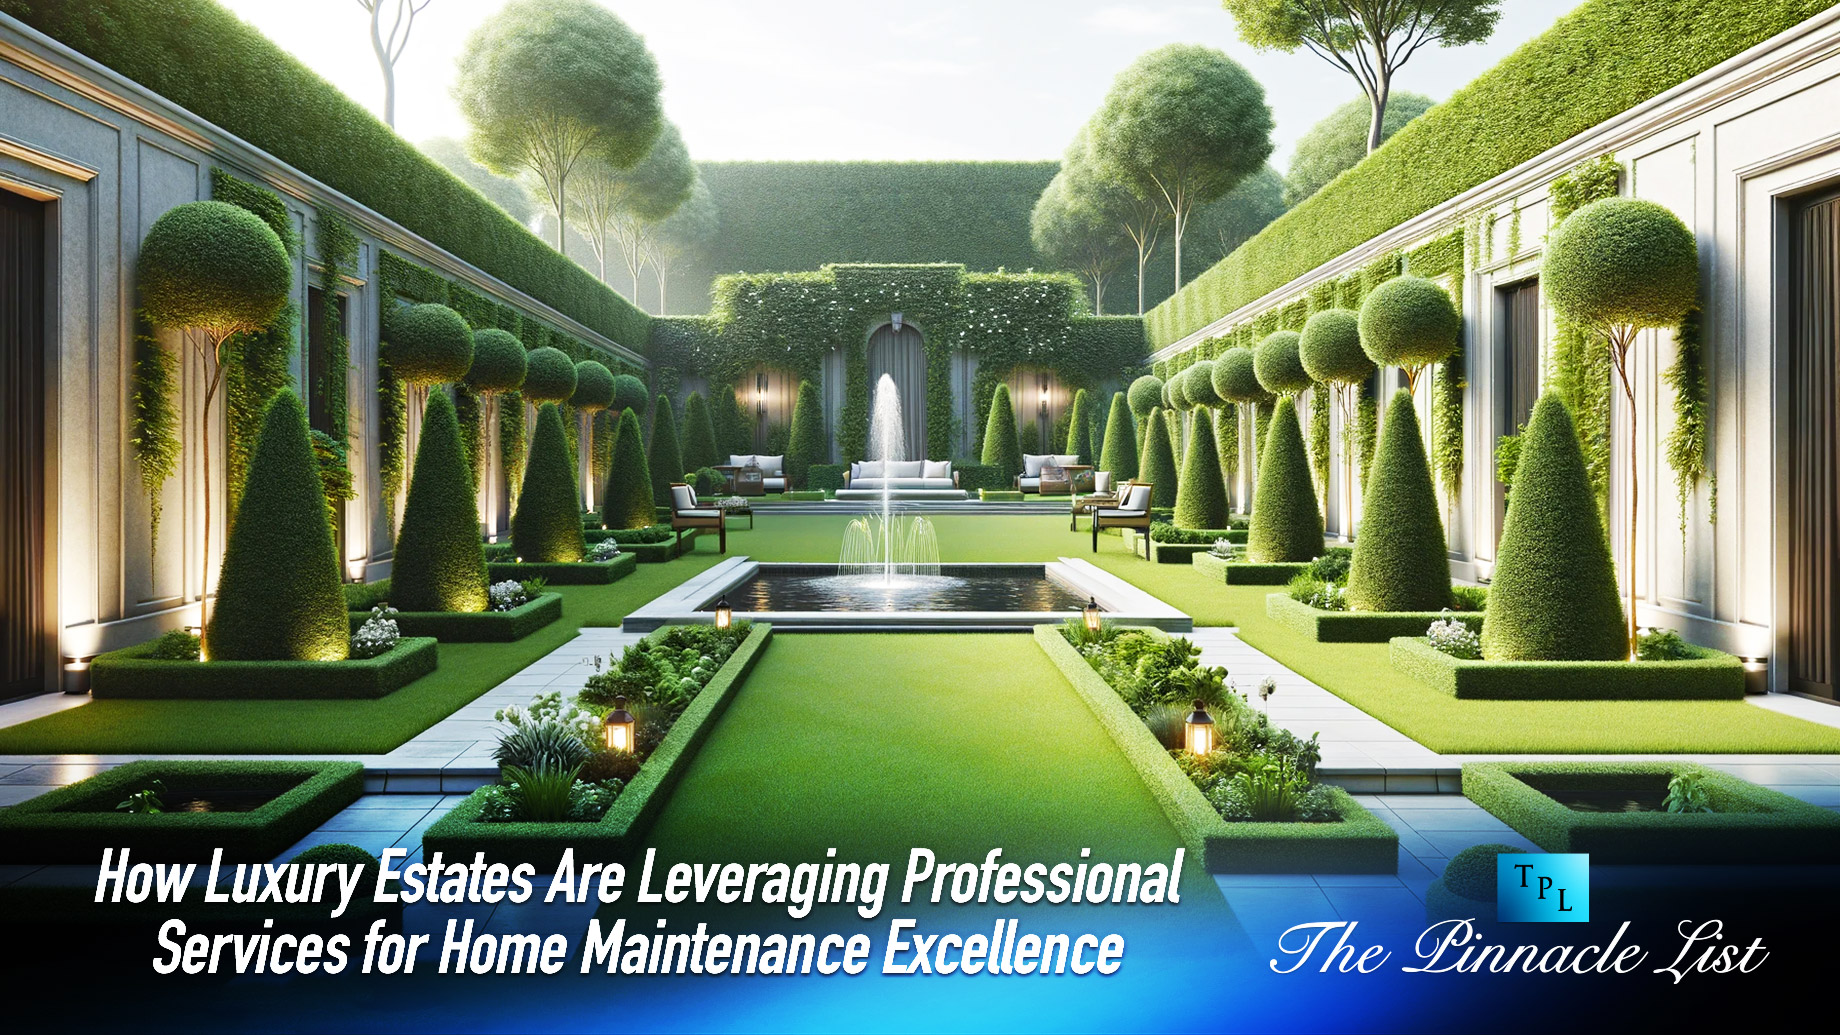 How Luxury Estates Are Leveraging Professional Services for Home Maintenance Excellence